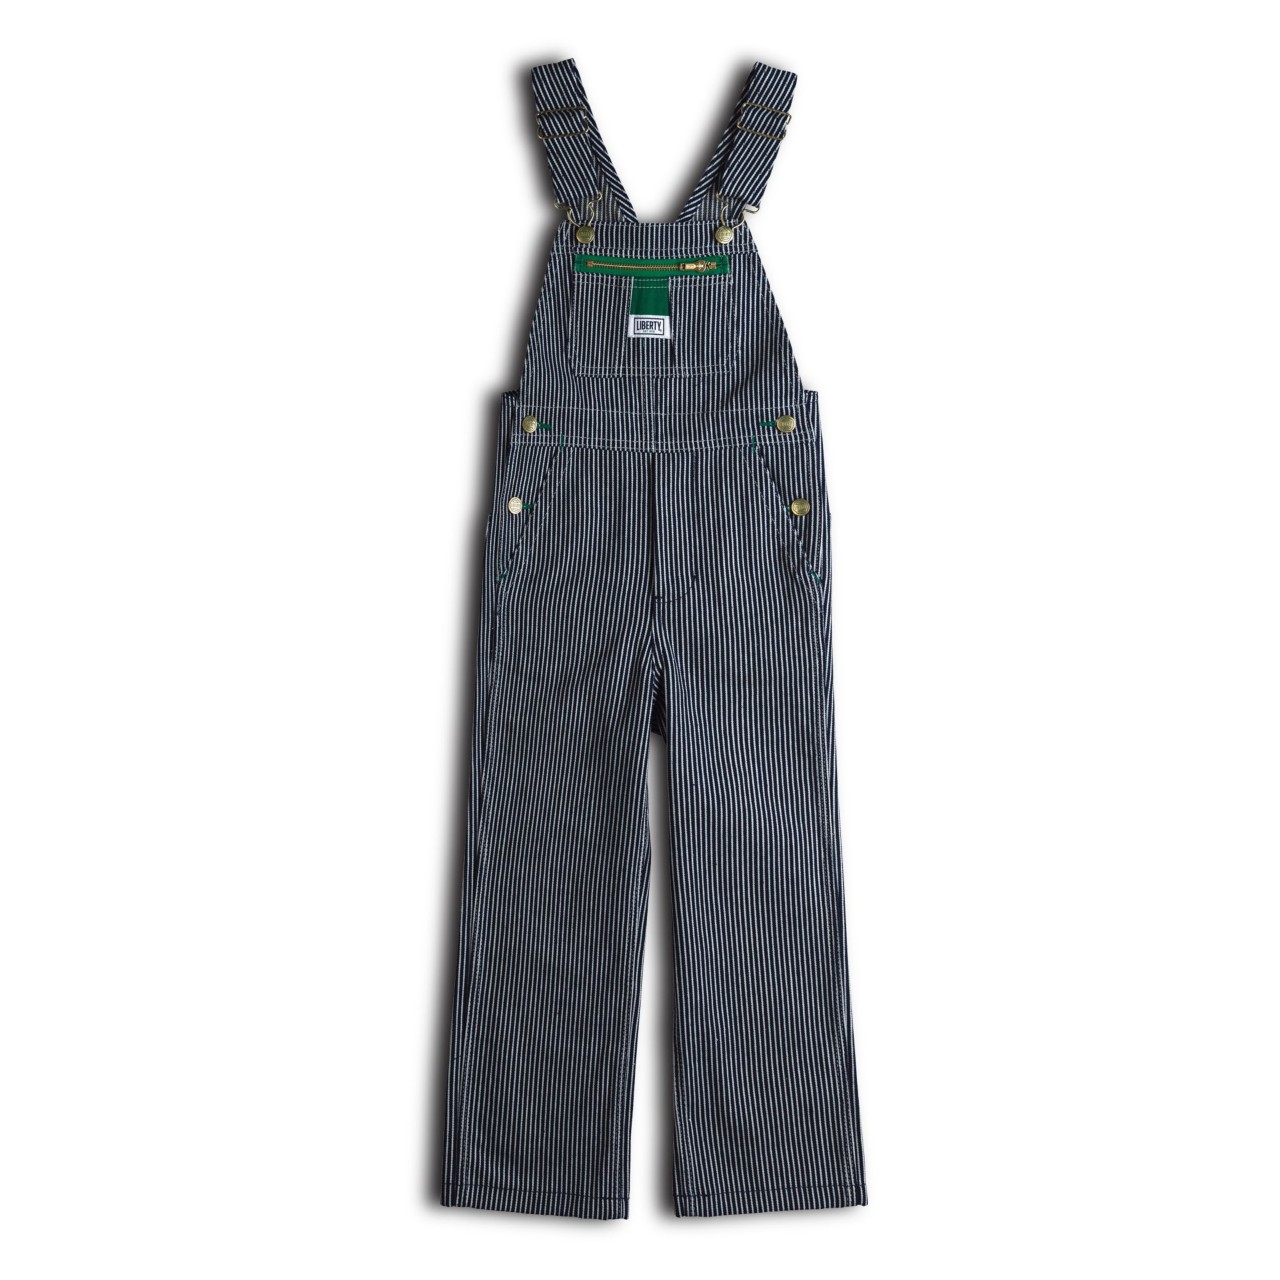 Image links to all kids overalls and coveralls